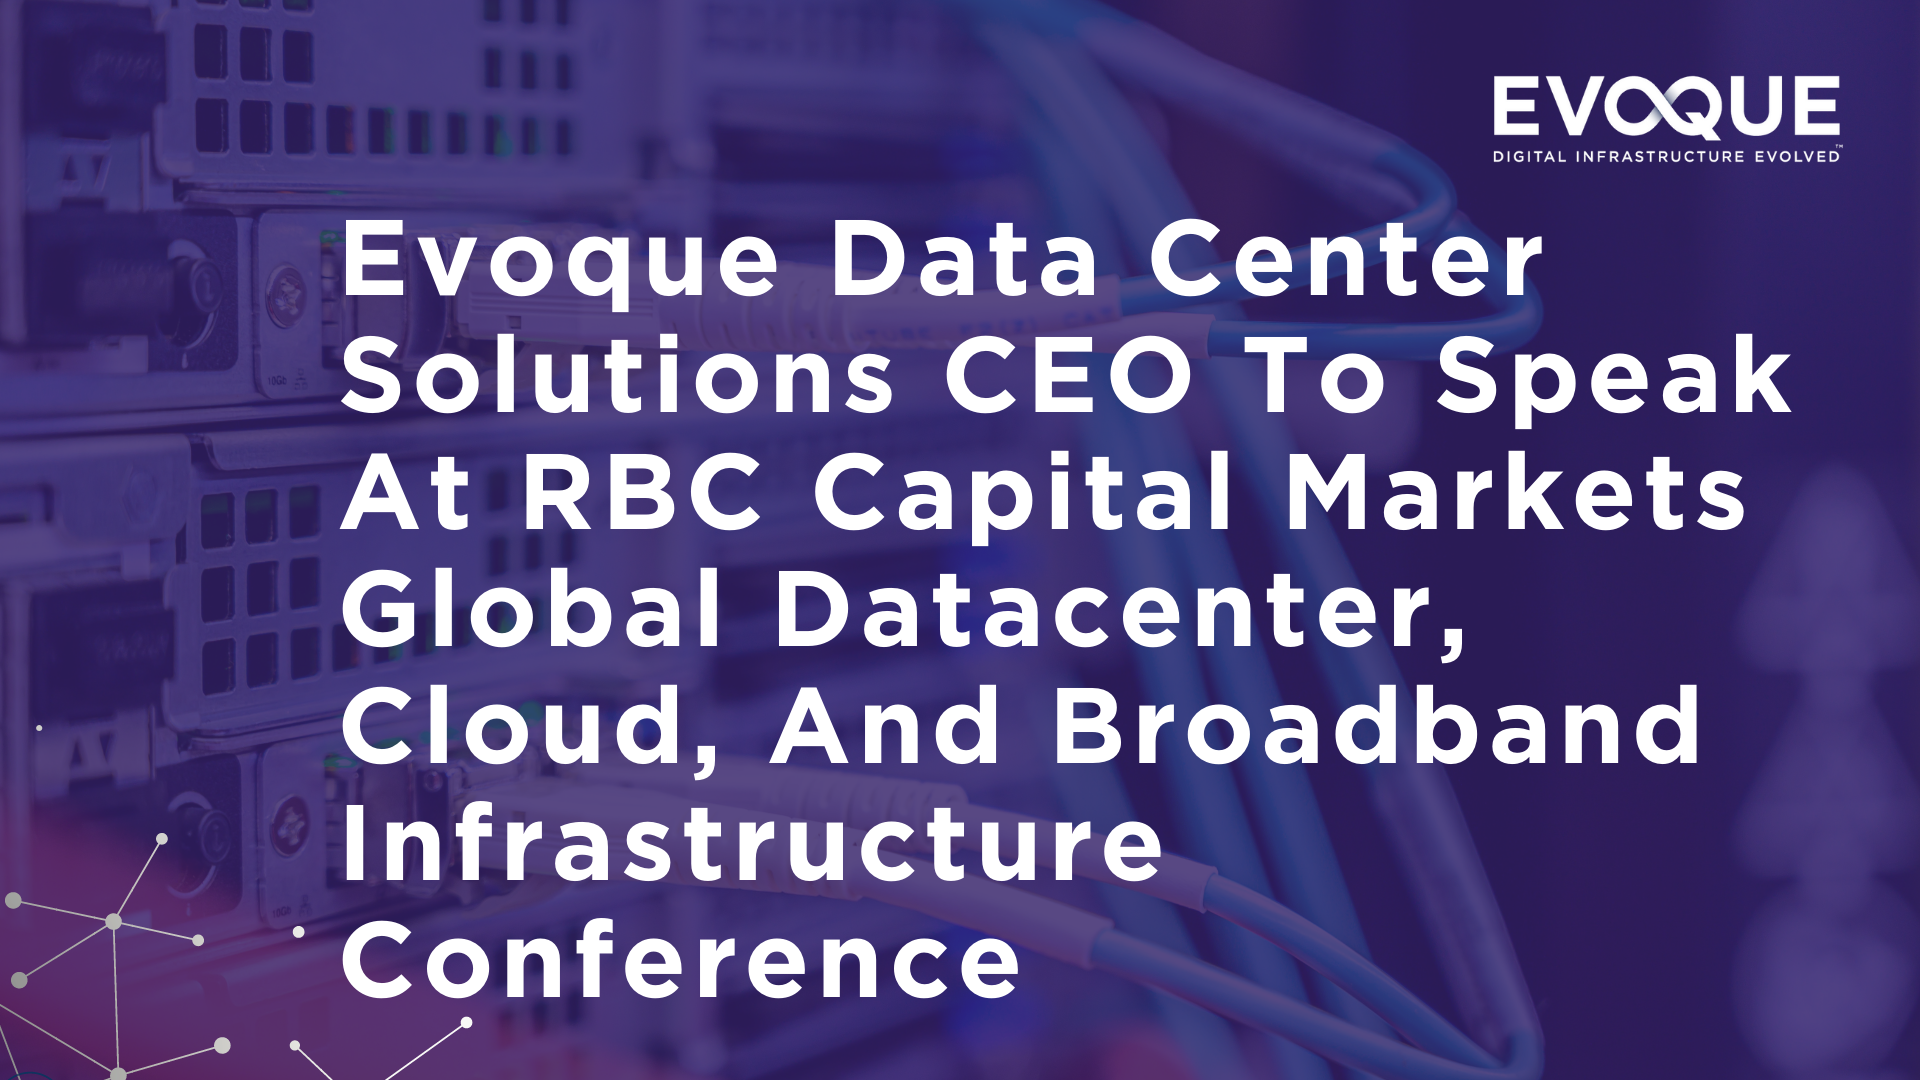 Evoque Data Center Solutions CEO To Speak At RBC Capital Markets Global Datacenter, Cloud, And Broadband Infrastructure Conference